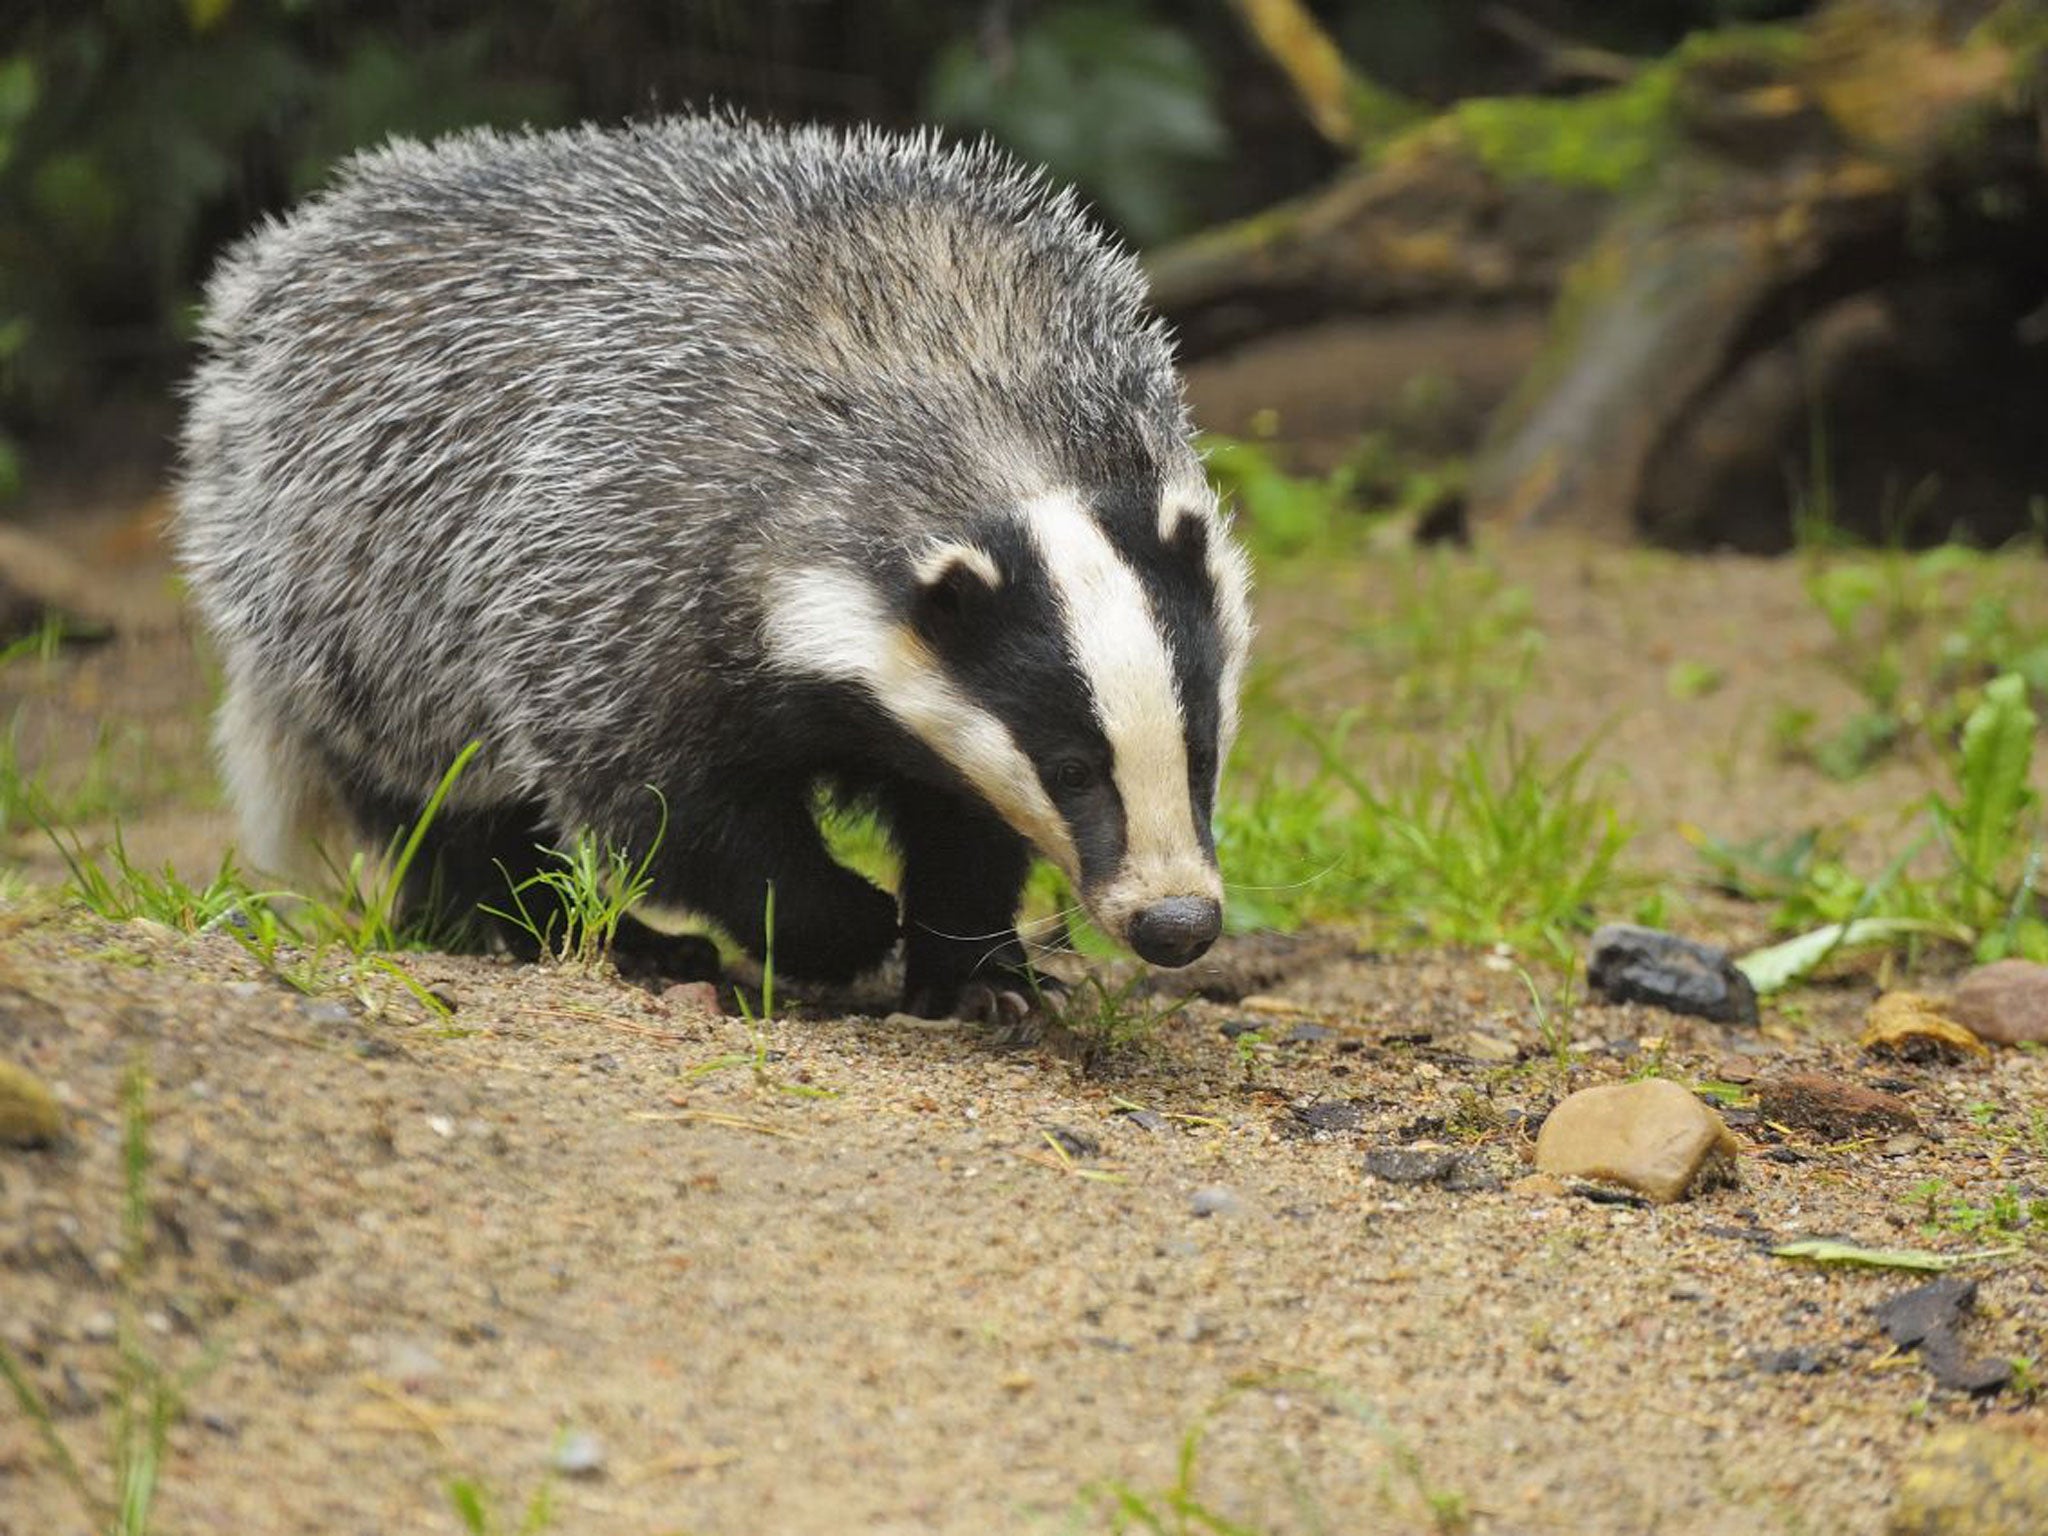 Badgers are being killed